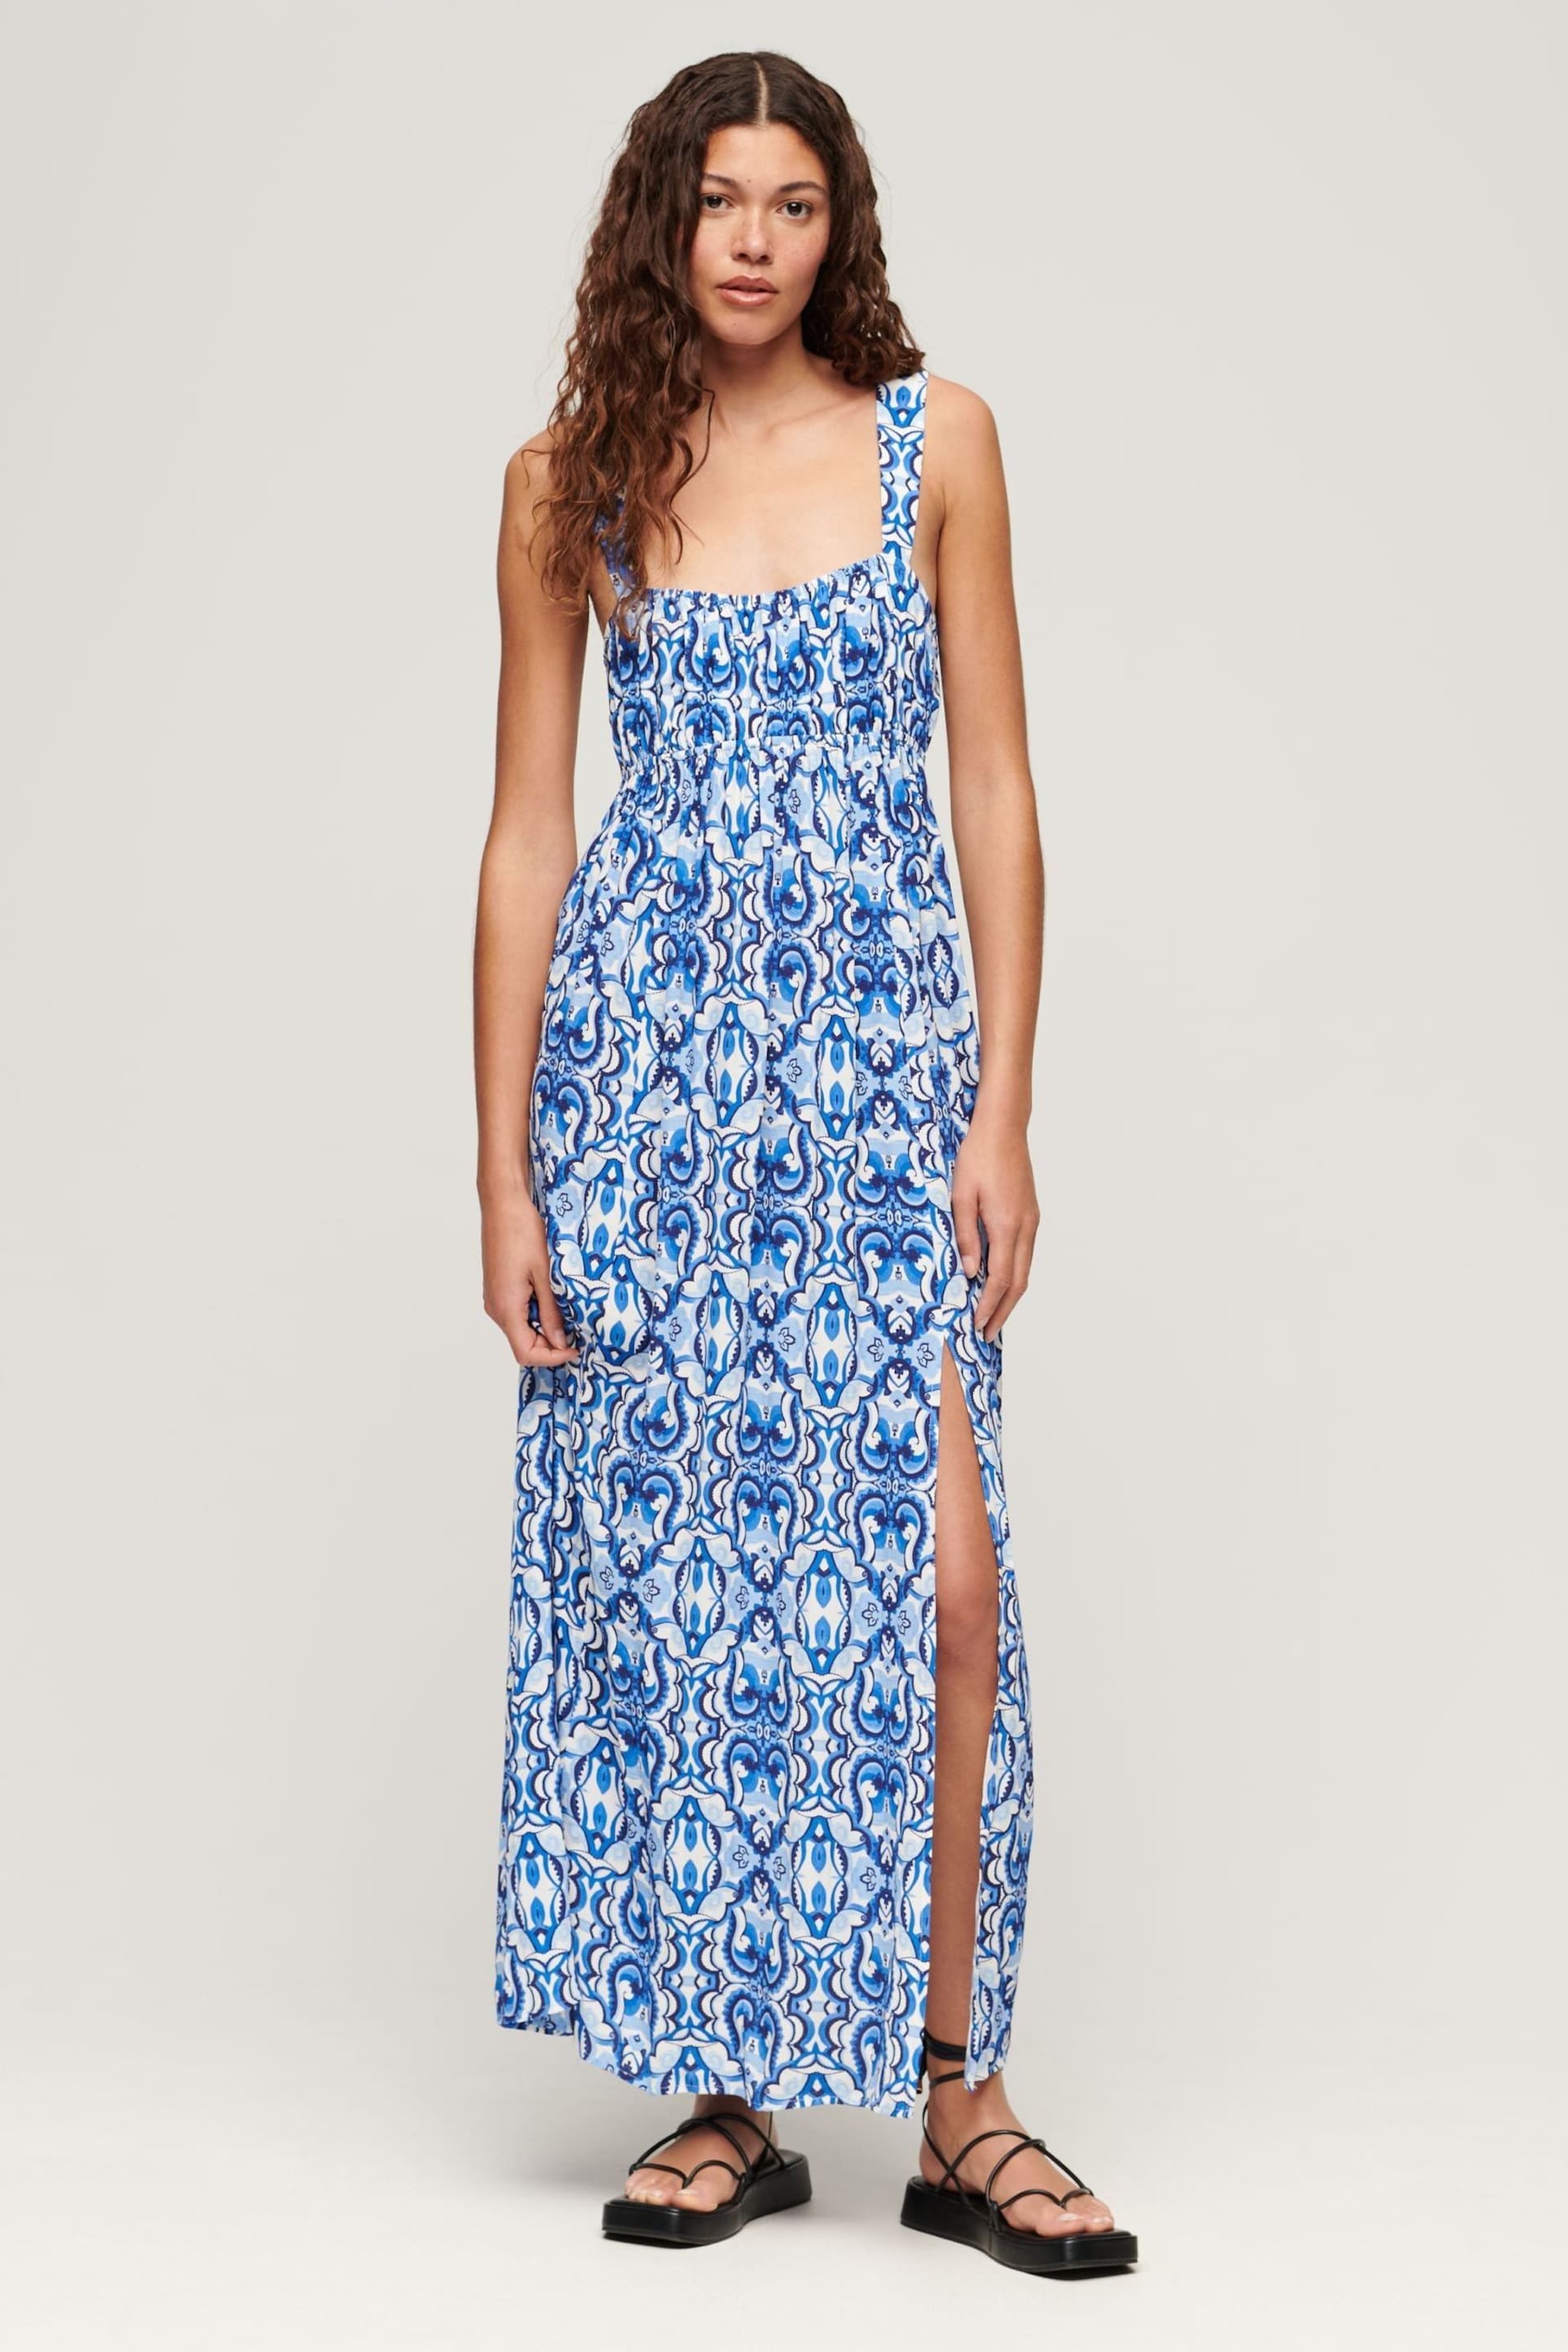 Superdry Blue Tie Maxi Dress - Image 1 of 10